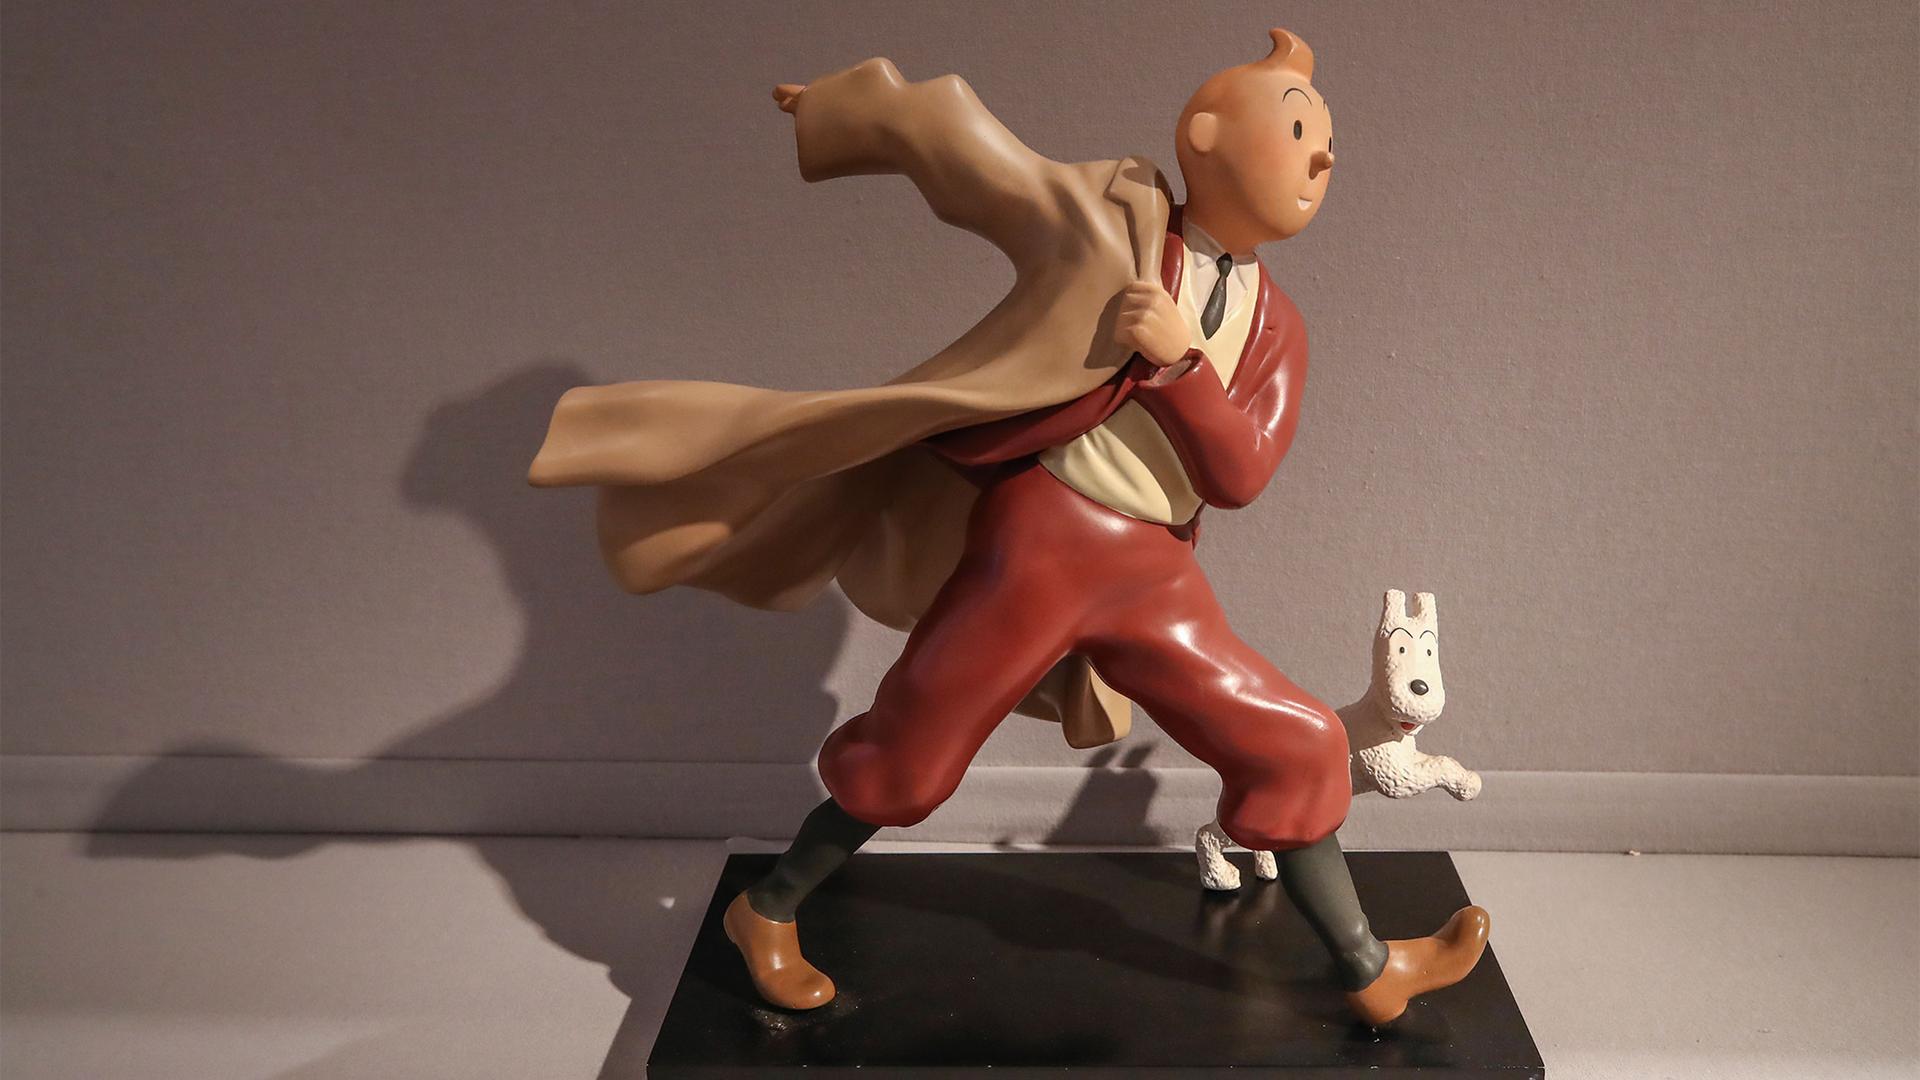 A 1988 polychrome resin sculpture is displayed of the comic character Tintin and his dog snowy